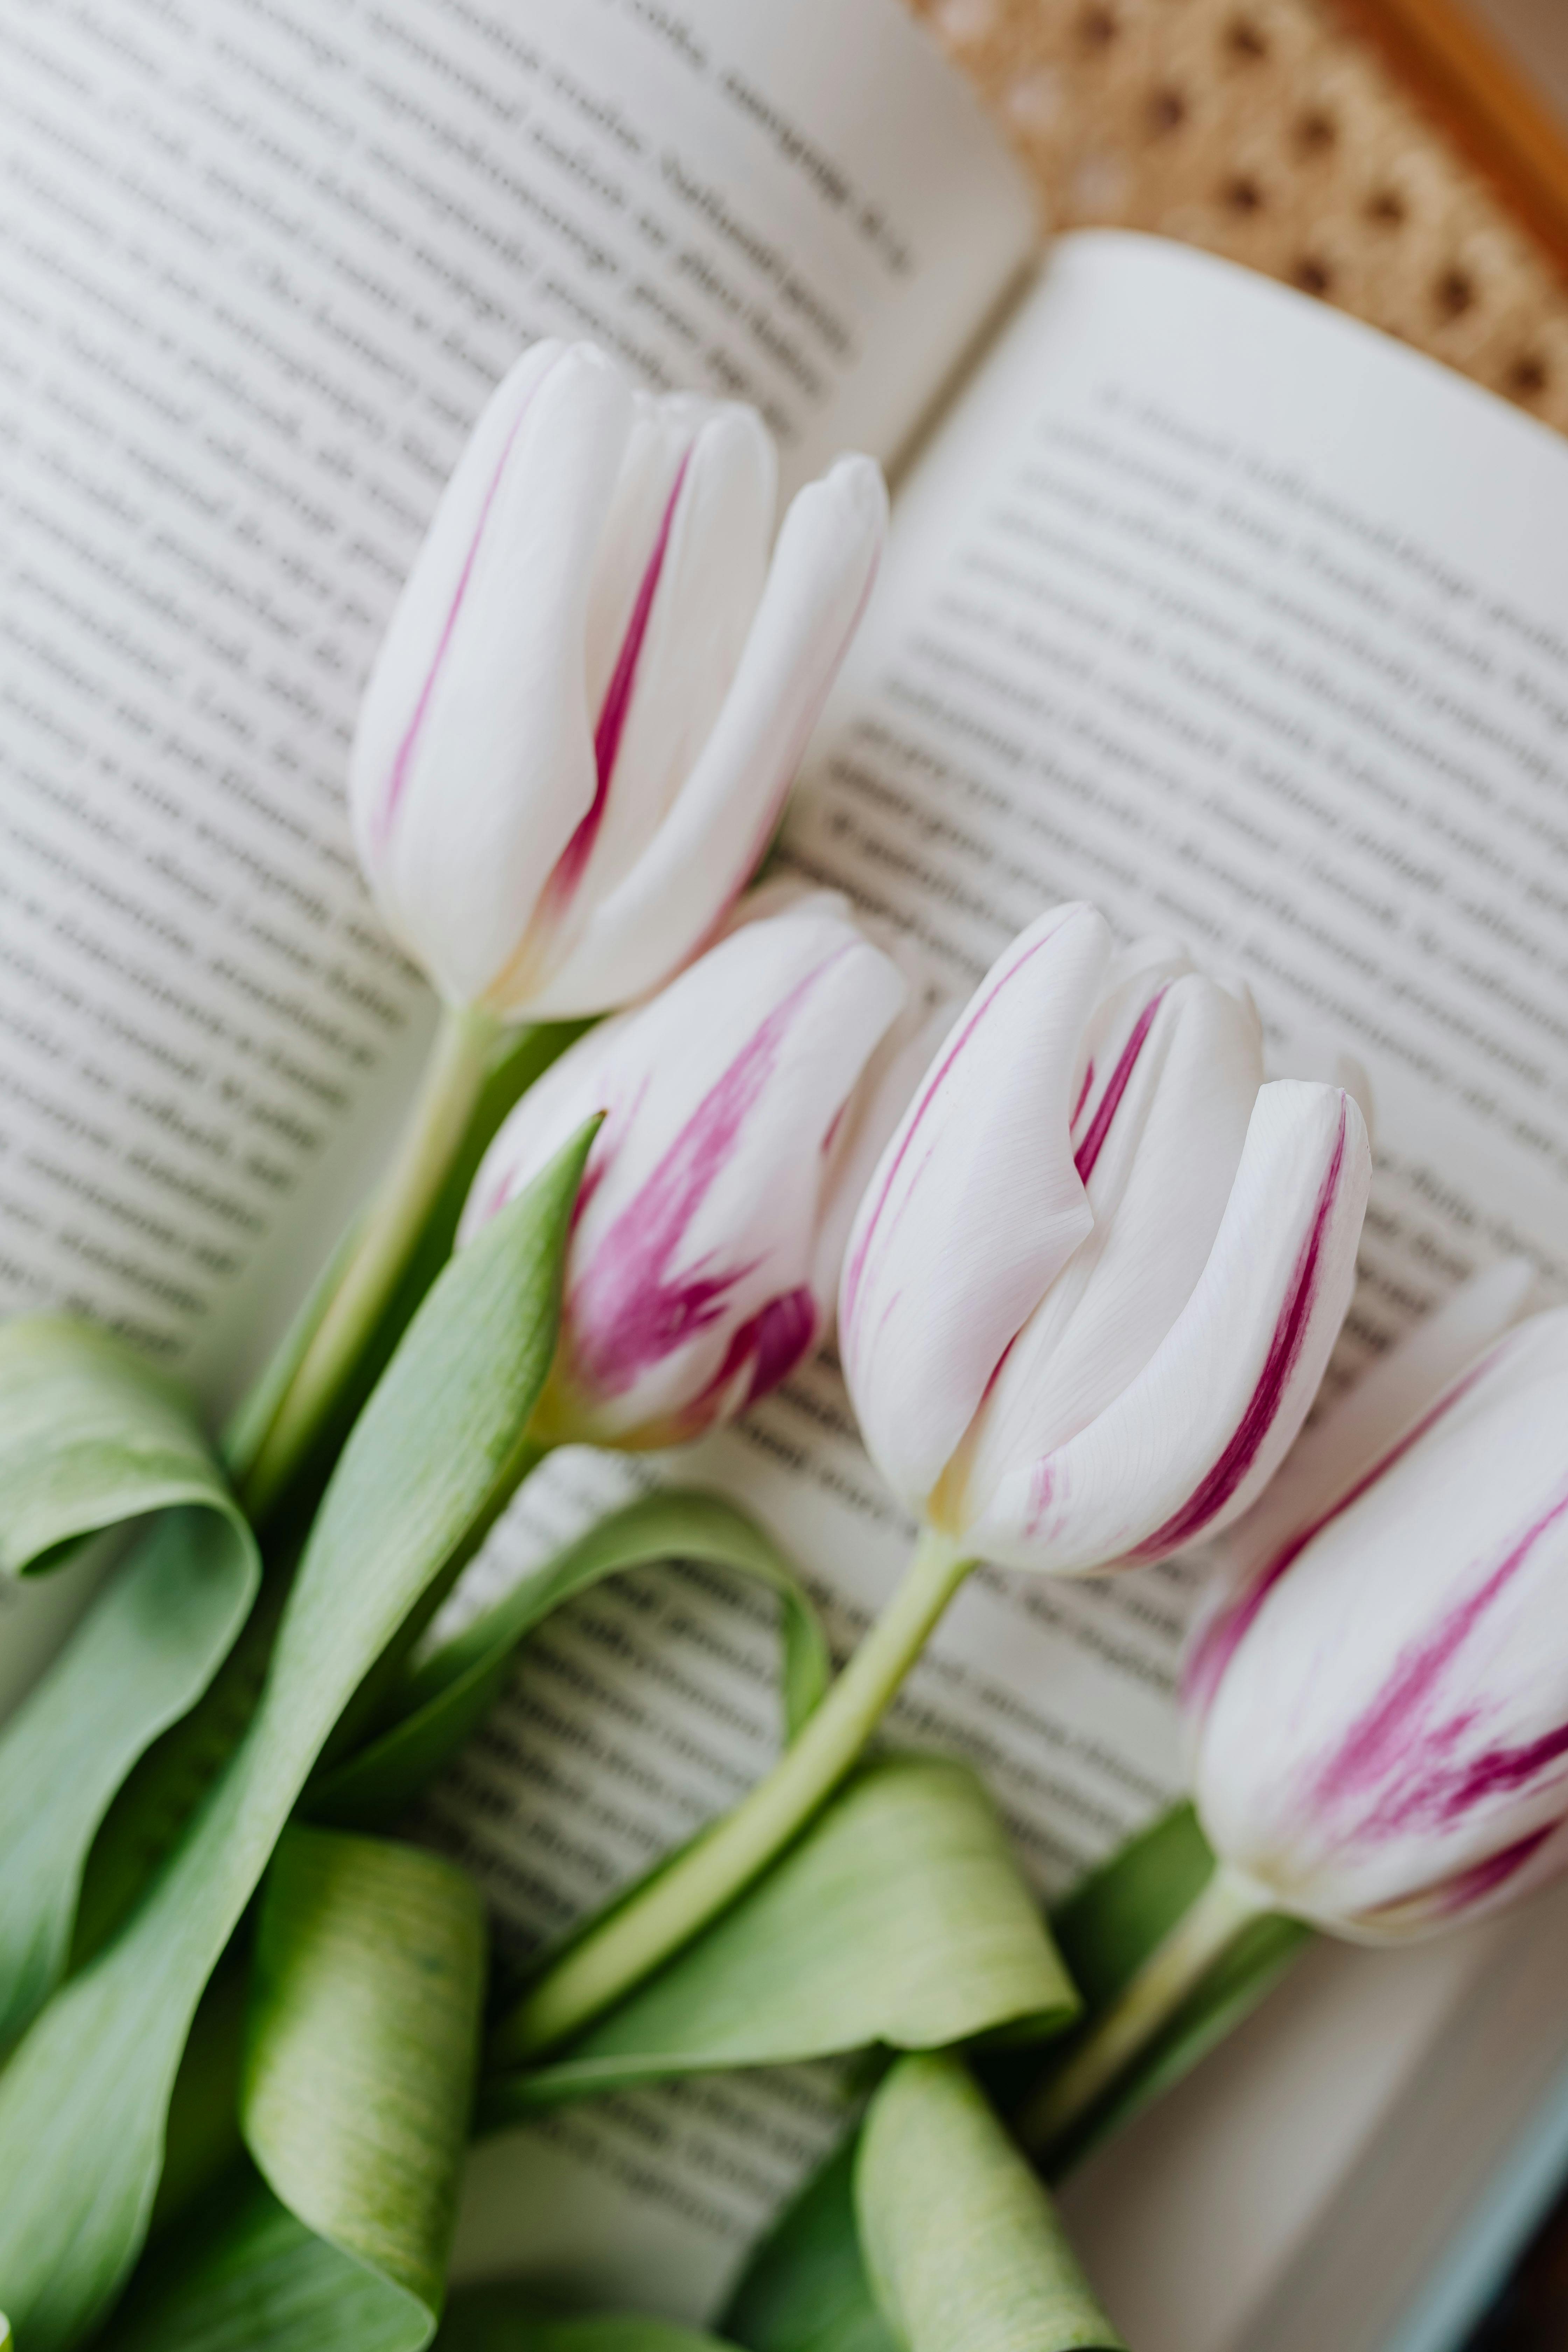 Tender white violet tulips on page of book placed on retro chair · Free ...